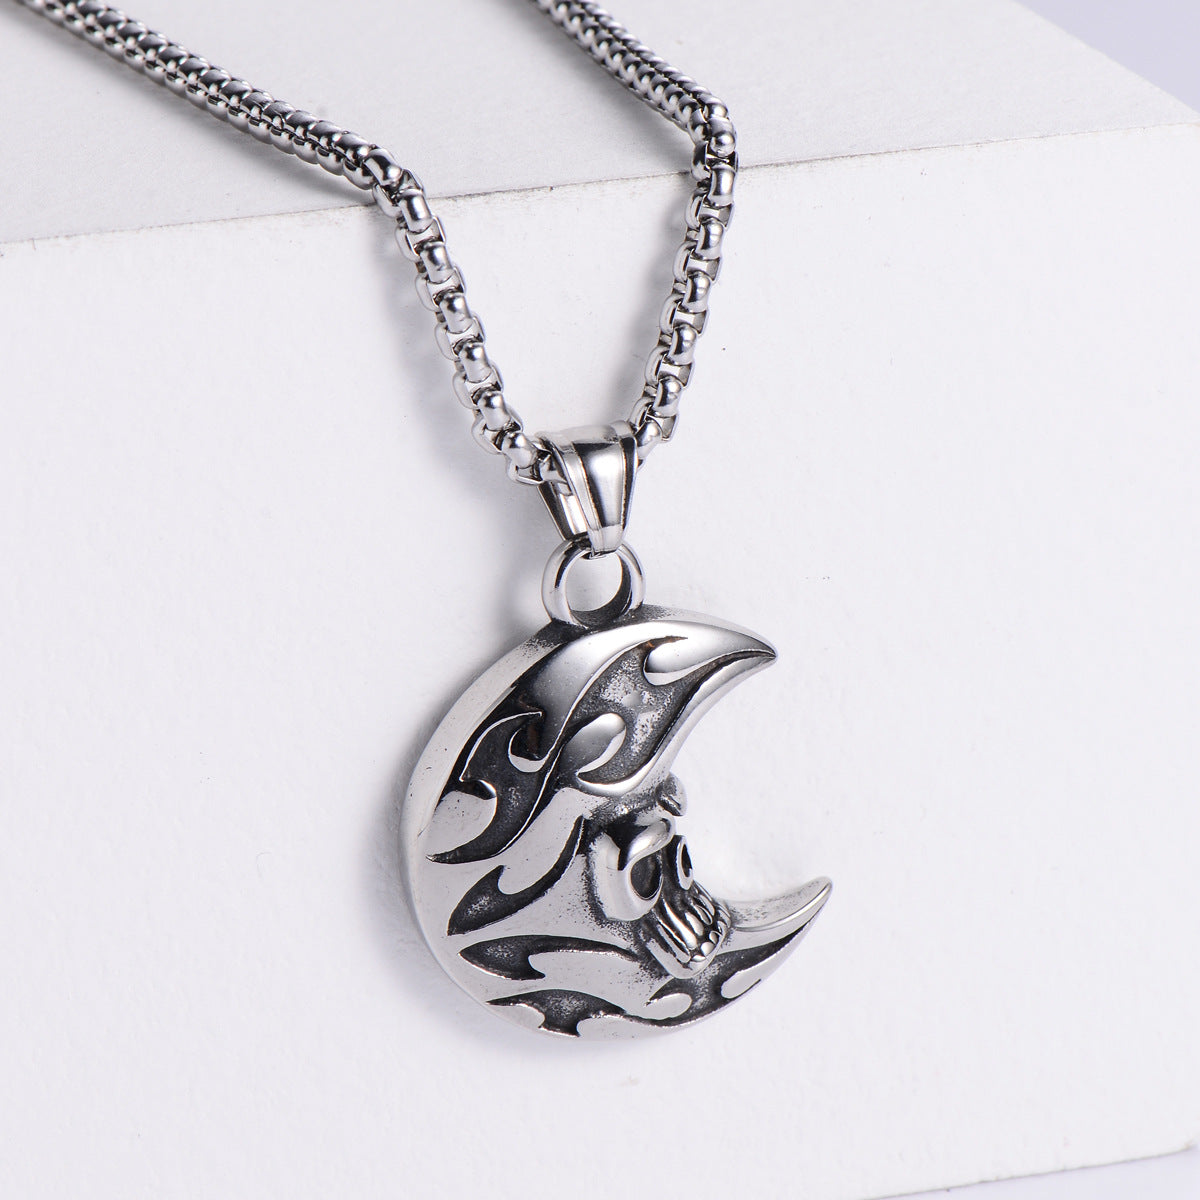 Stainless Steel Moon Pendant with 60cm Chain - Silver Color - 33x31mm 16 grams - NEW922